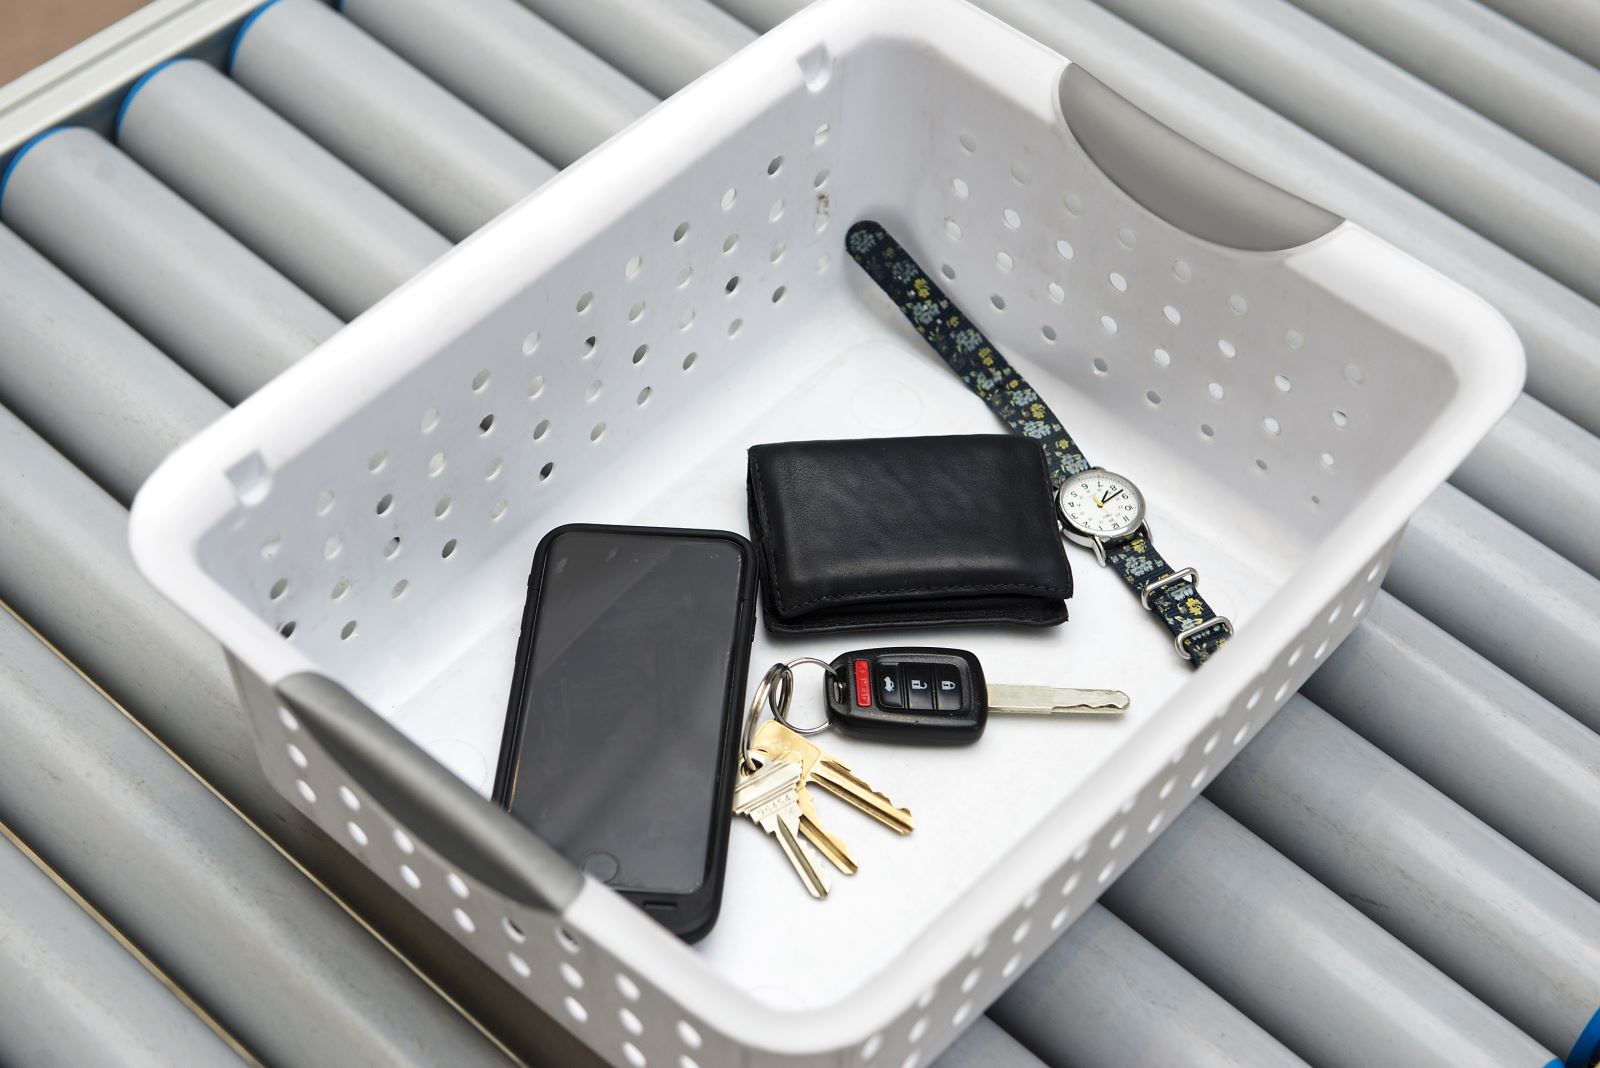 Security basket with phone, wallet, keys, and watch